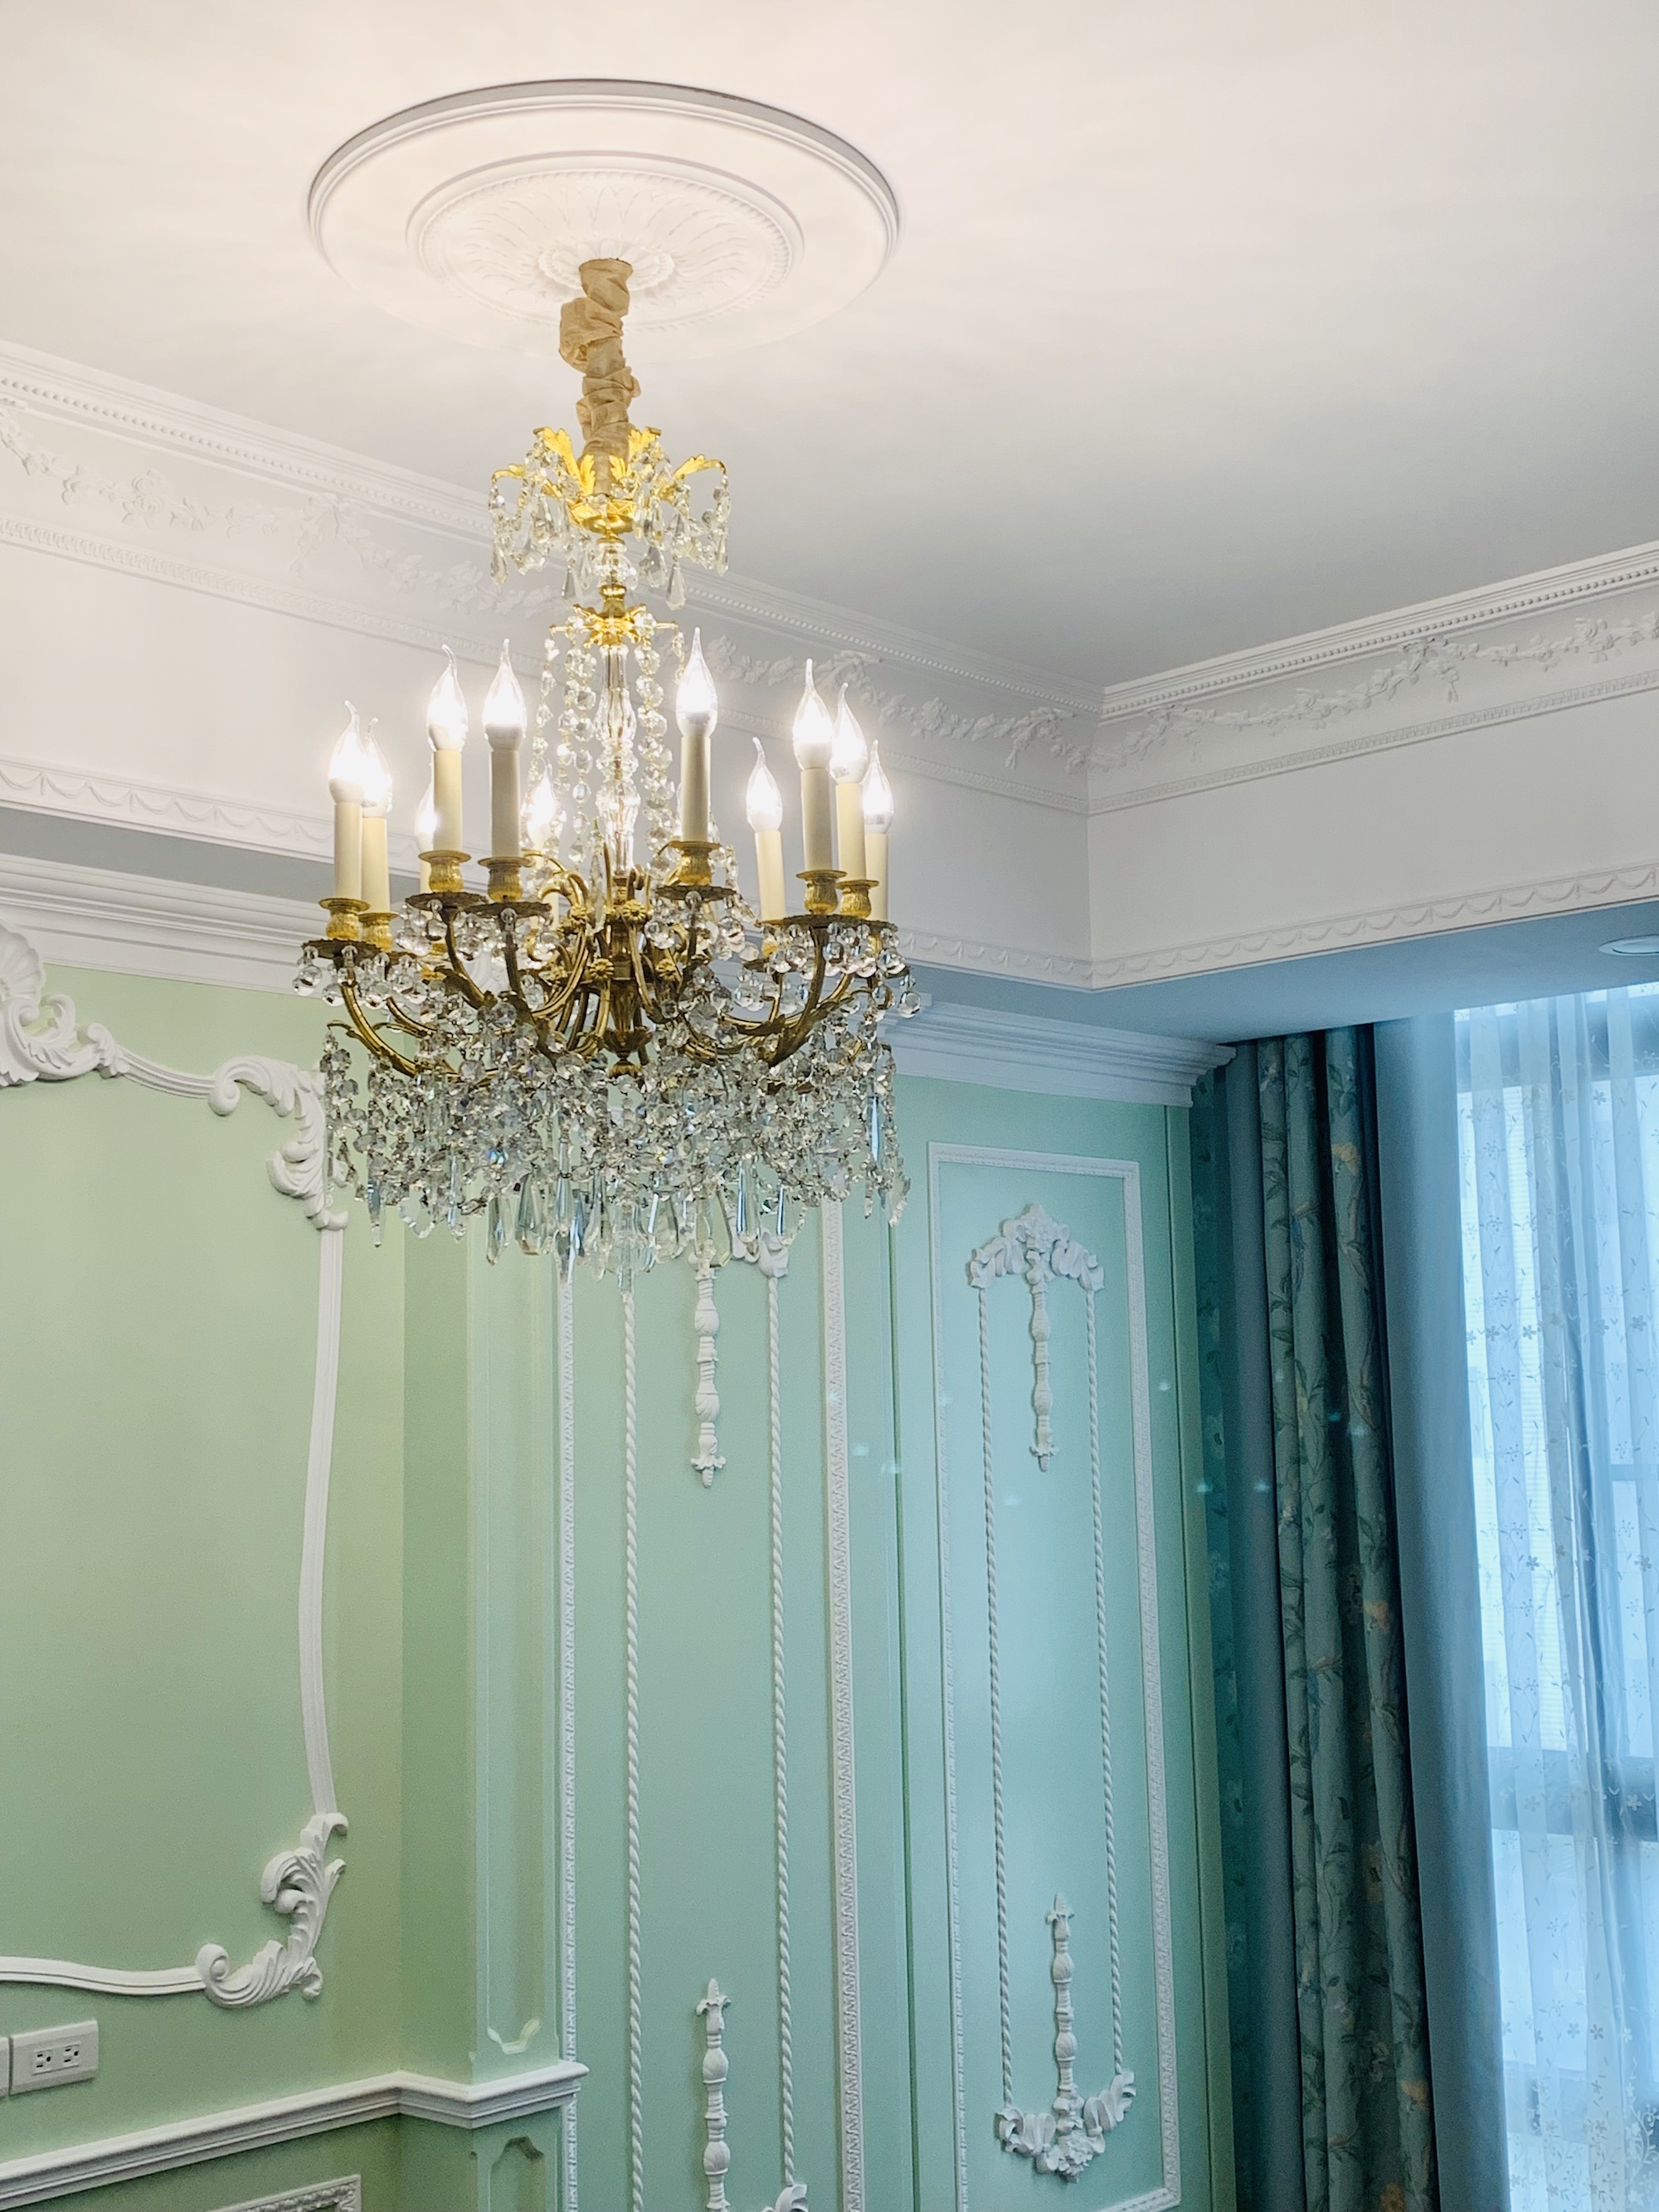 French chandelier in the style of Louis XVI in the bedroom